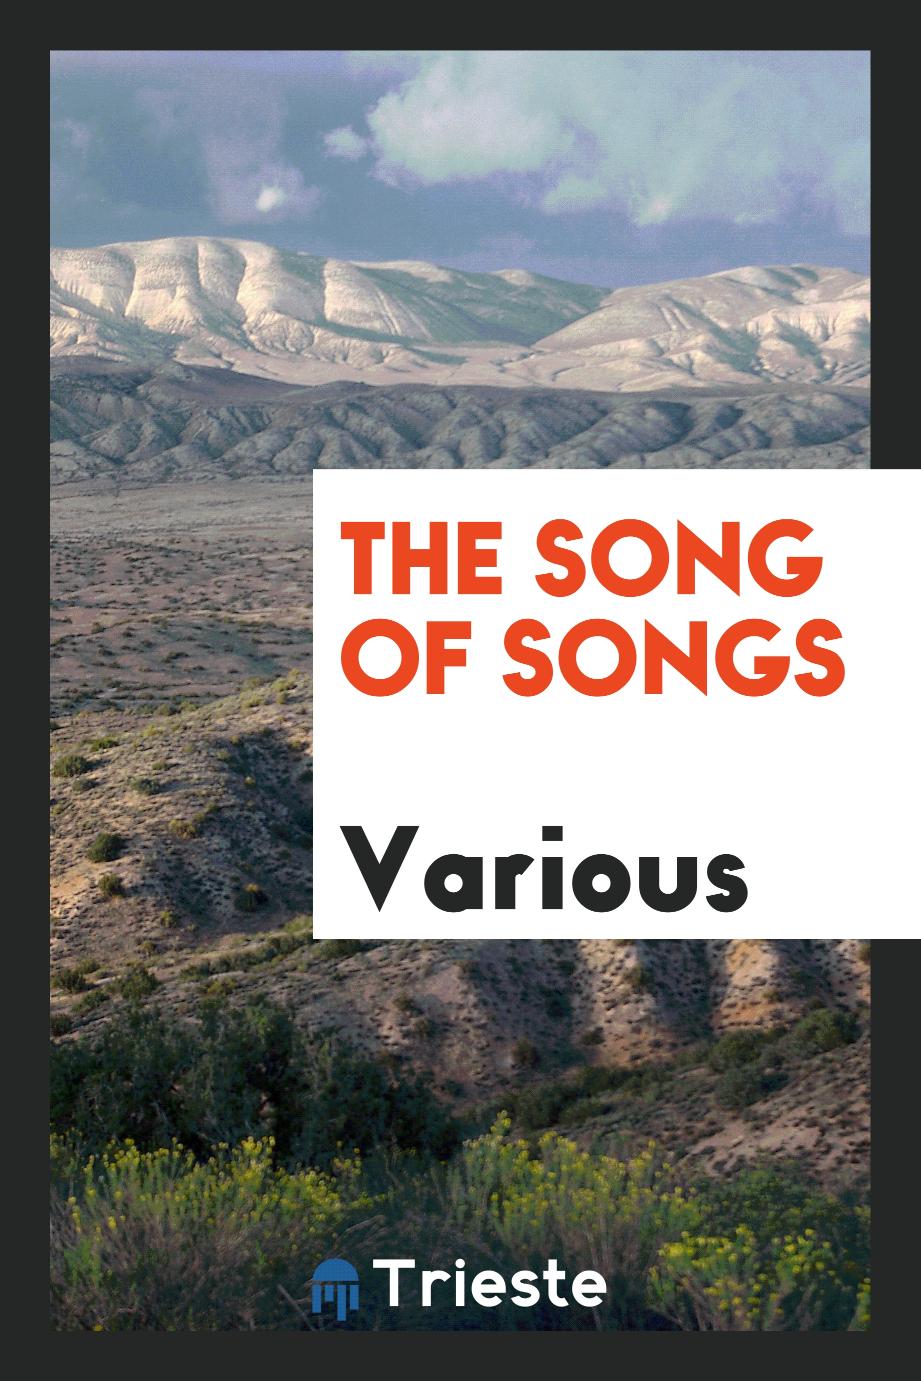 The Song of songs